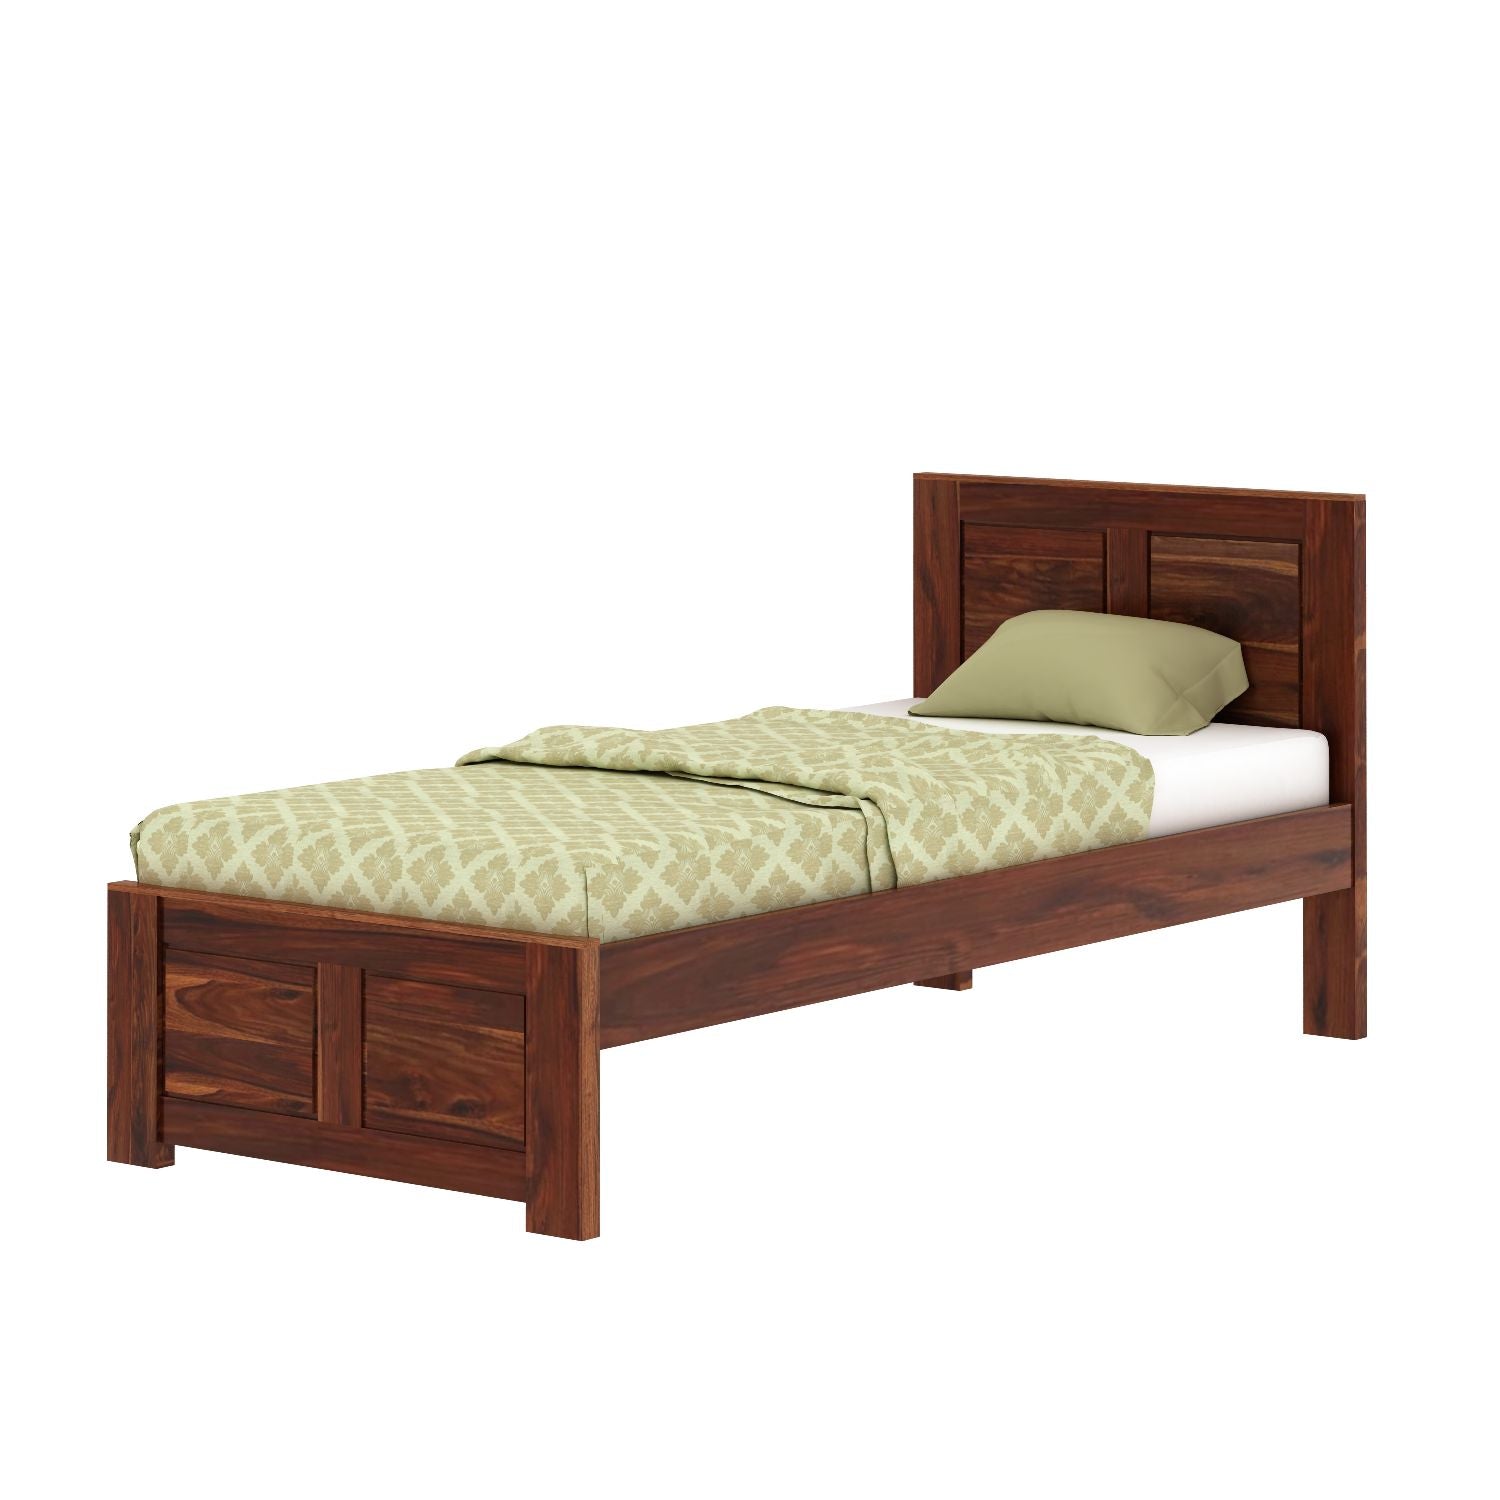 Woodwing Solid Sheesham Wood Single Bed Without Storage (Natural Finish)